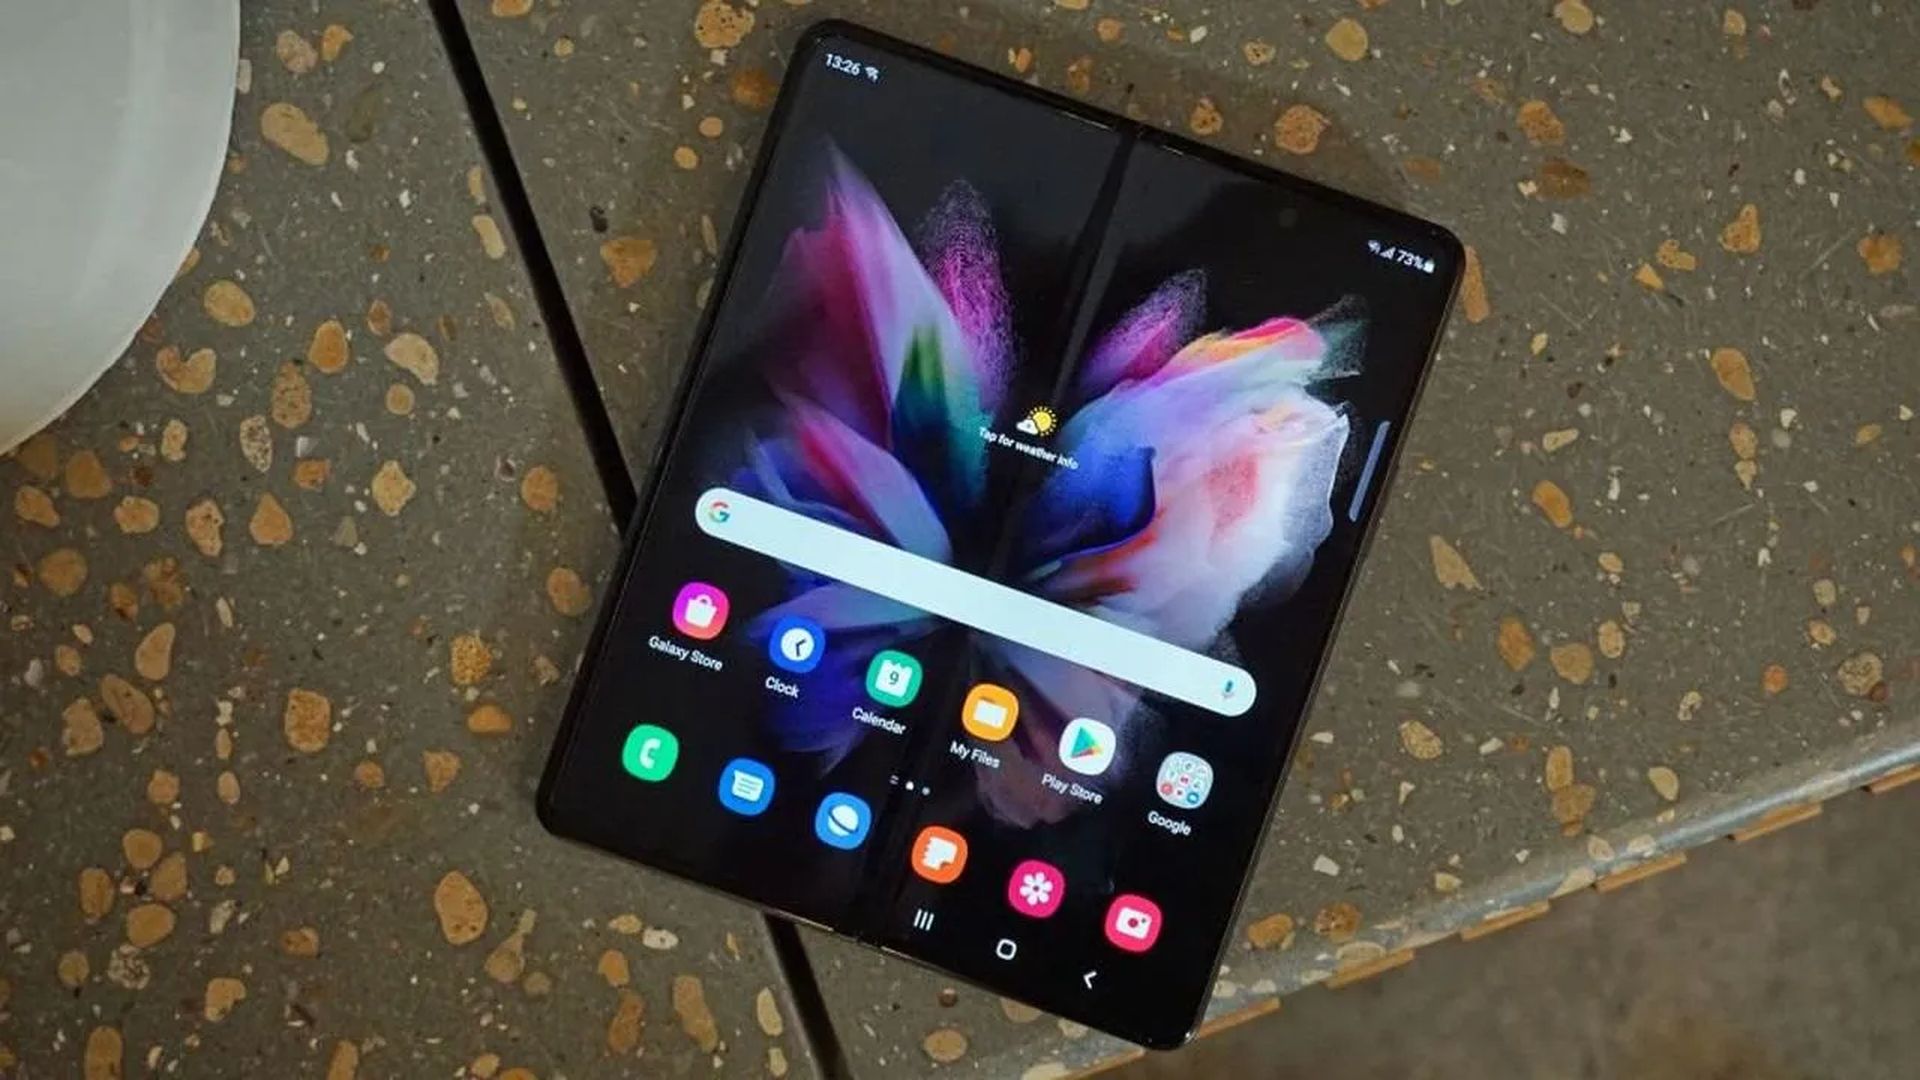 At Samsung Galaxy Unpacked August 2022, the tech giant finally revealed the Galaxy Z Fold 4 after weeks of leaks and rumors. Let's review its specs, price, and release date.